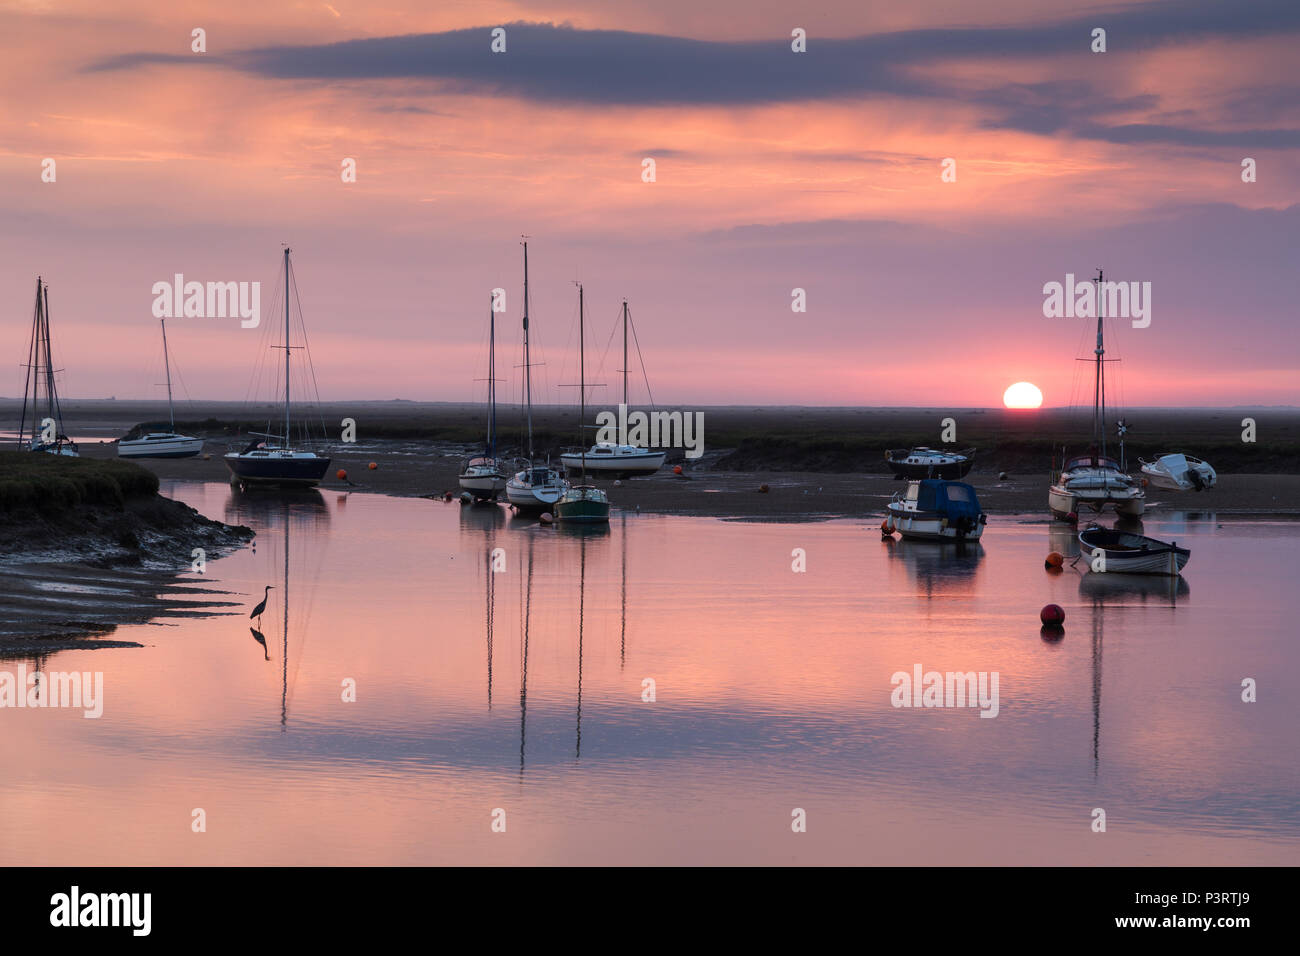 The sun rising behind sailing boats in the harbour at Wells next the Sea with a heron in the foreground. Stock Photo